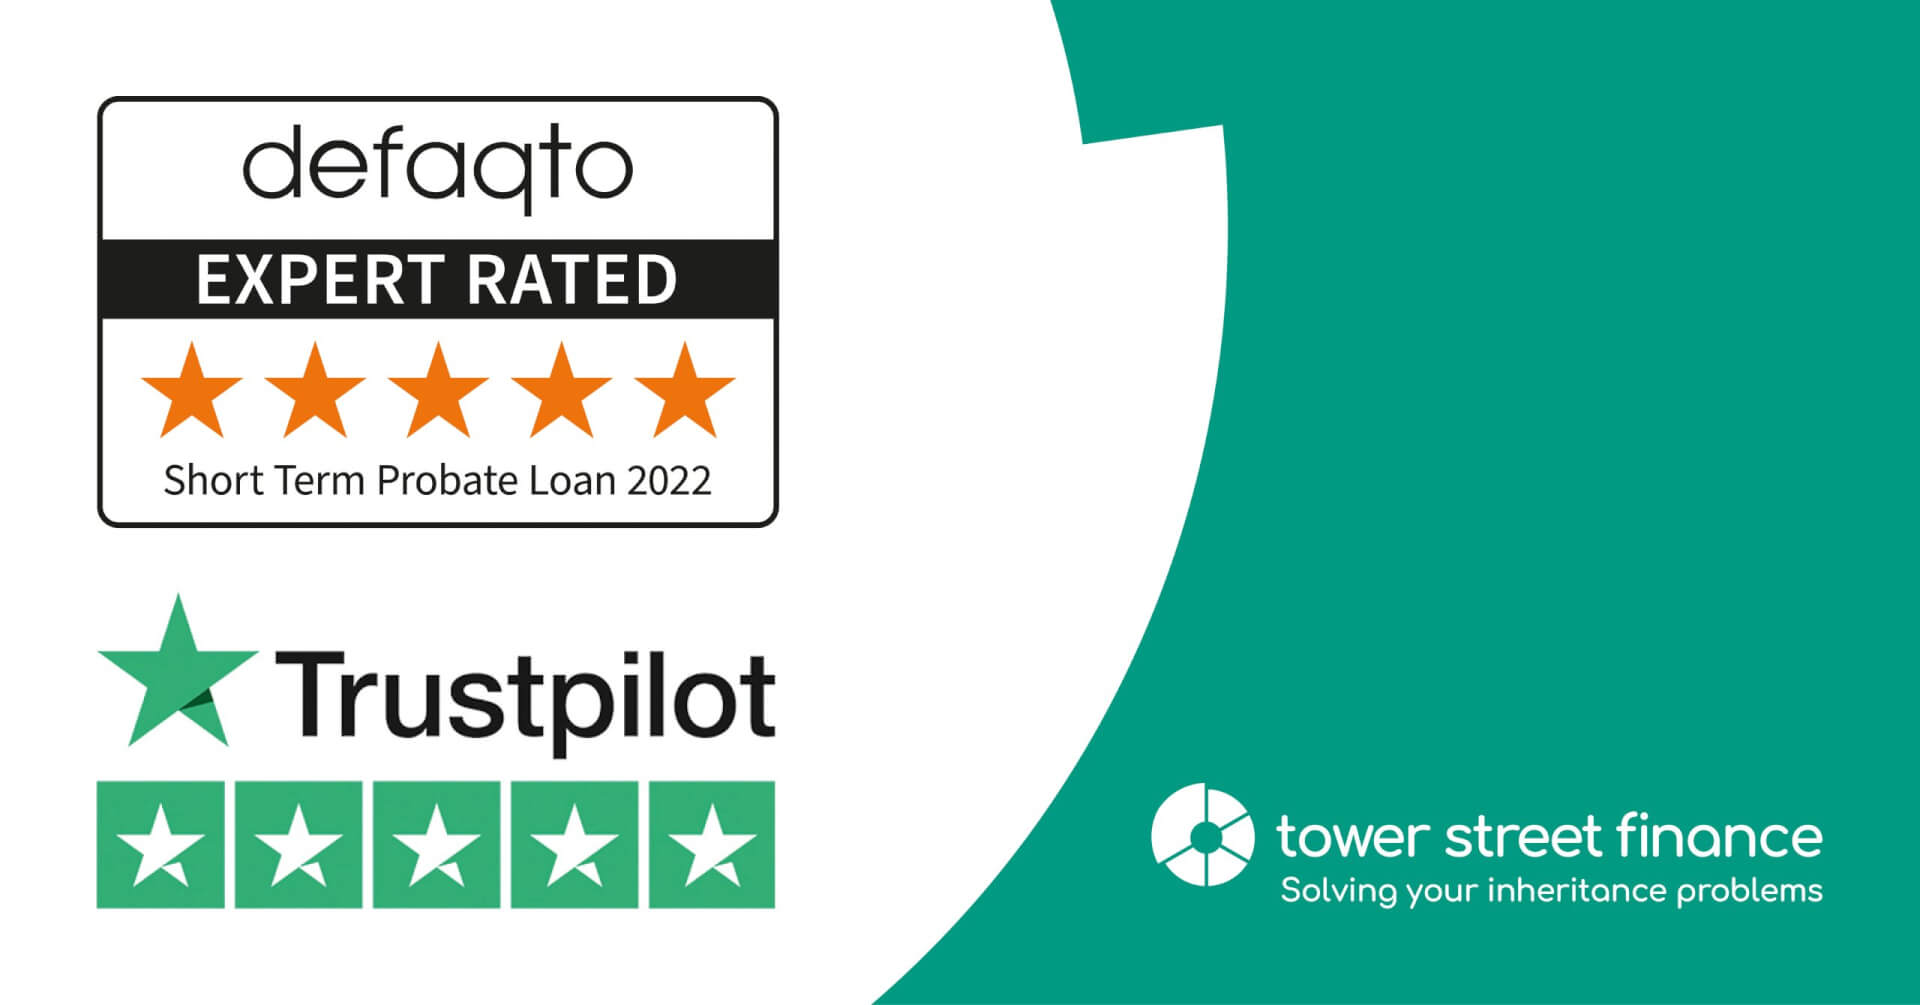 Five-star ratings for Tower Street Finance